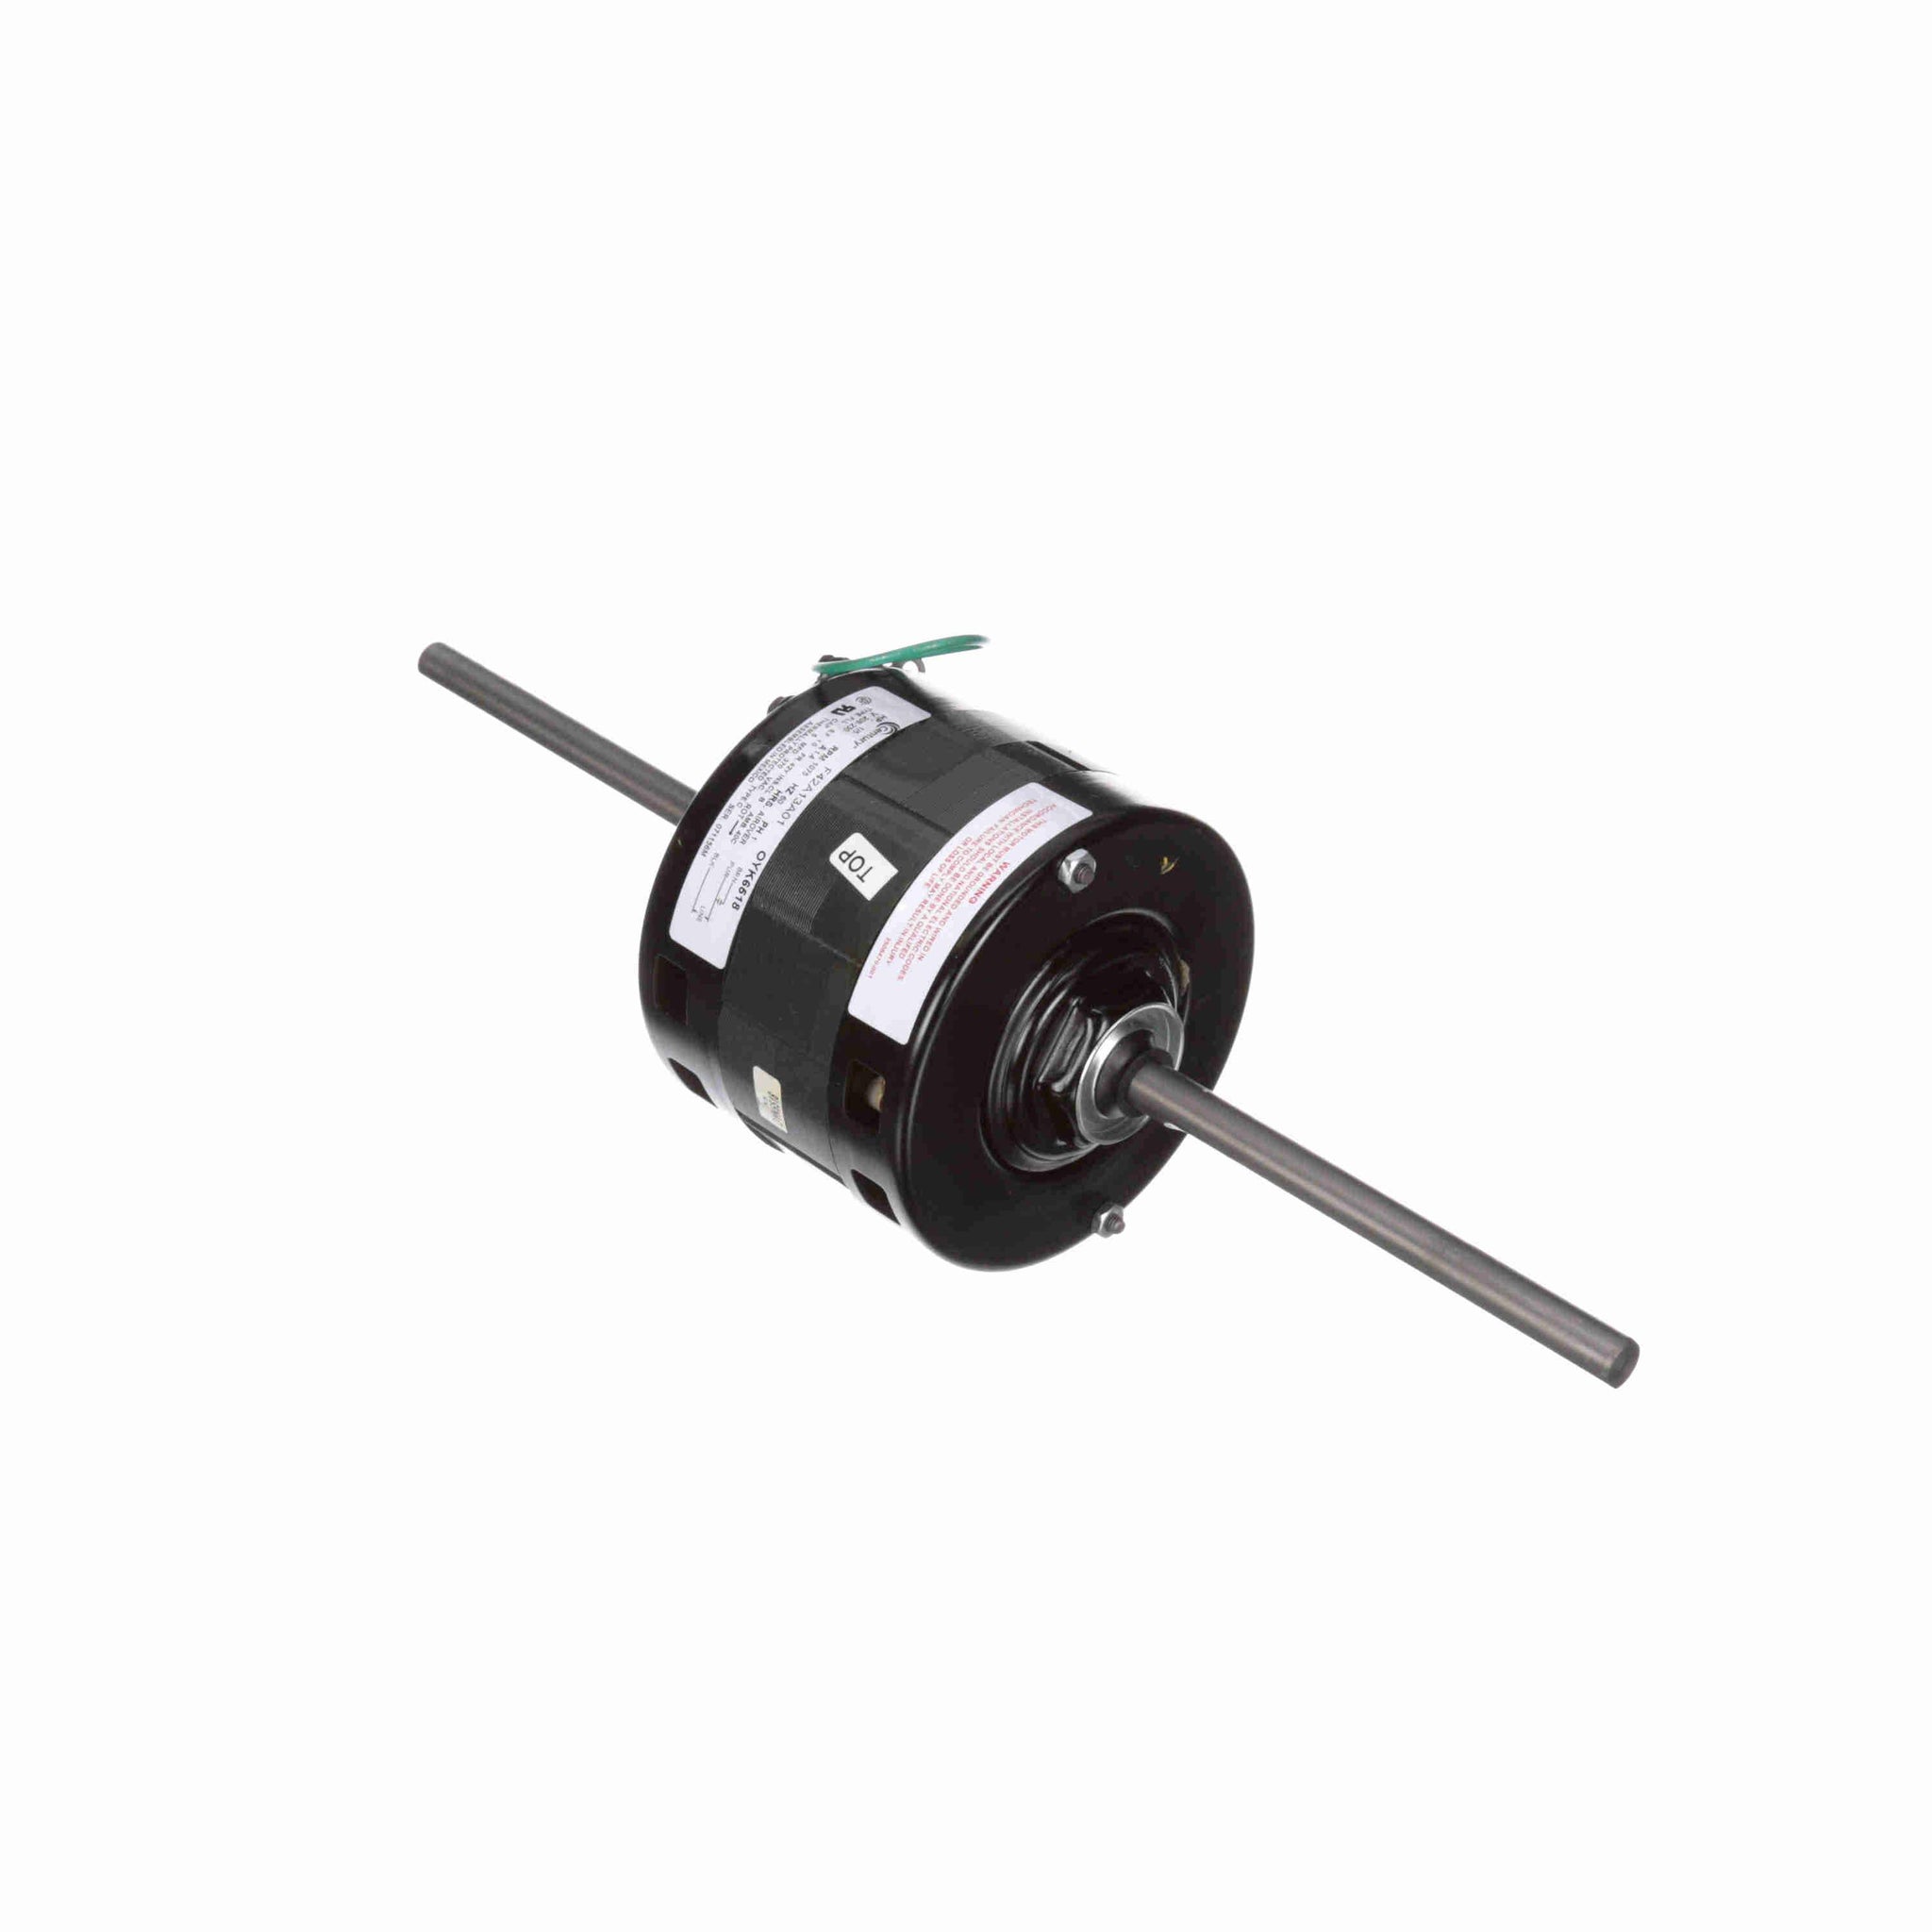 OYK6518 - 1/5 HP OEM Replacement Motor, 1075 RPM, 208-230 Volts, 42 Frame, Semi Enclosed - Hardware & Moreee